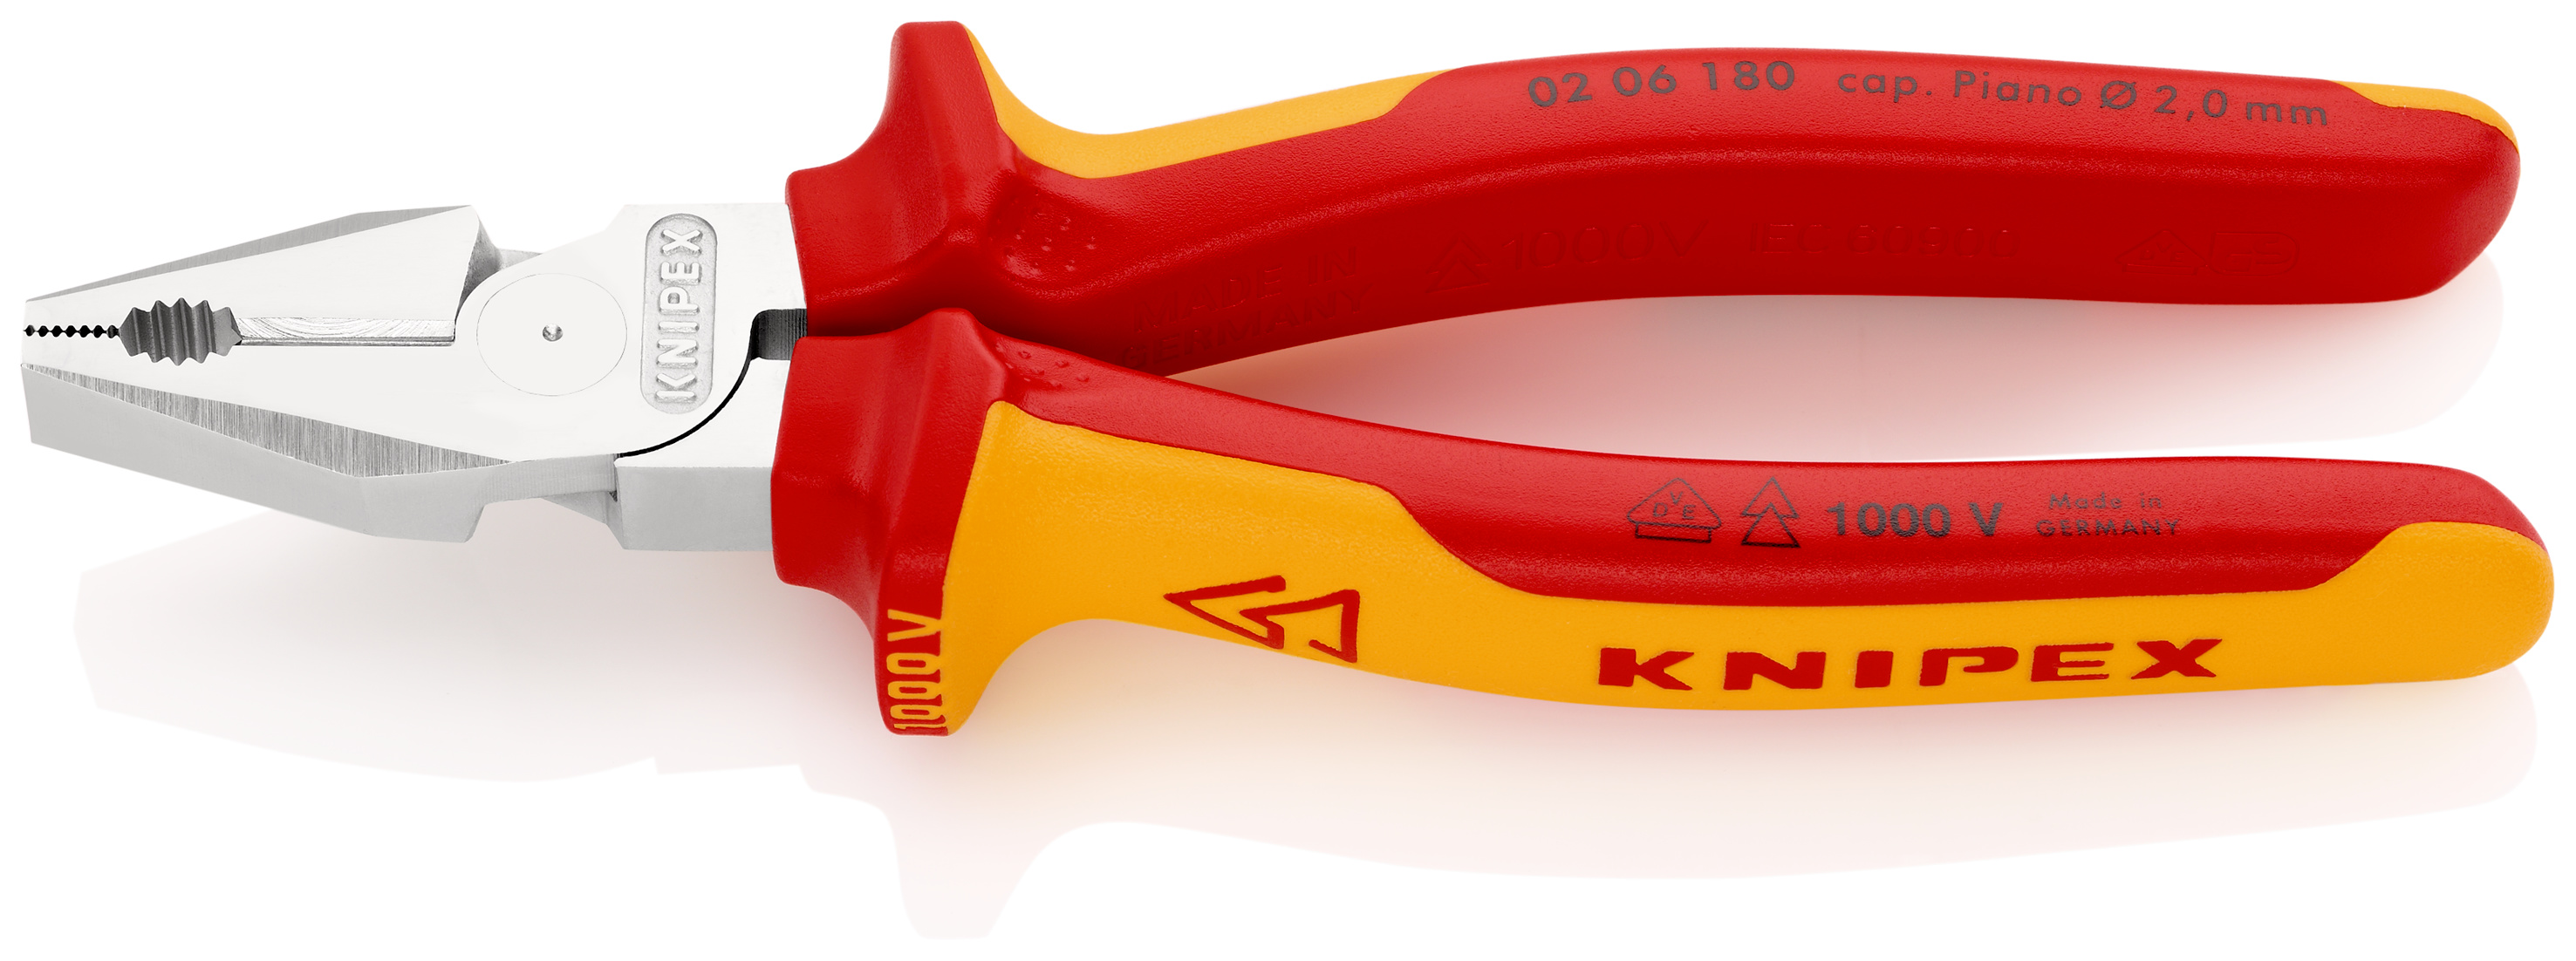 KNIPEX Knipex 02 01 180 SB High Leverage Combination Pliers 180mm 5010559195879 